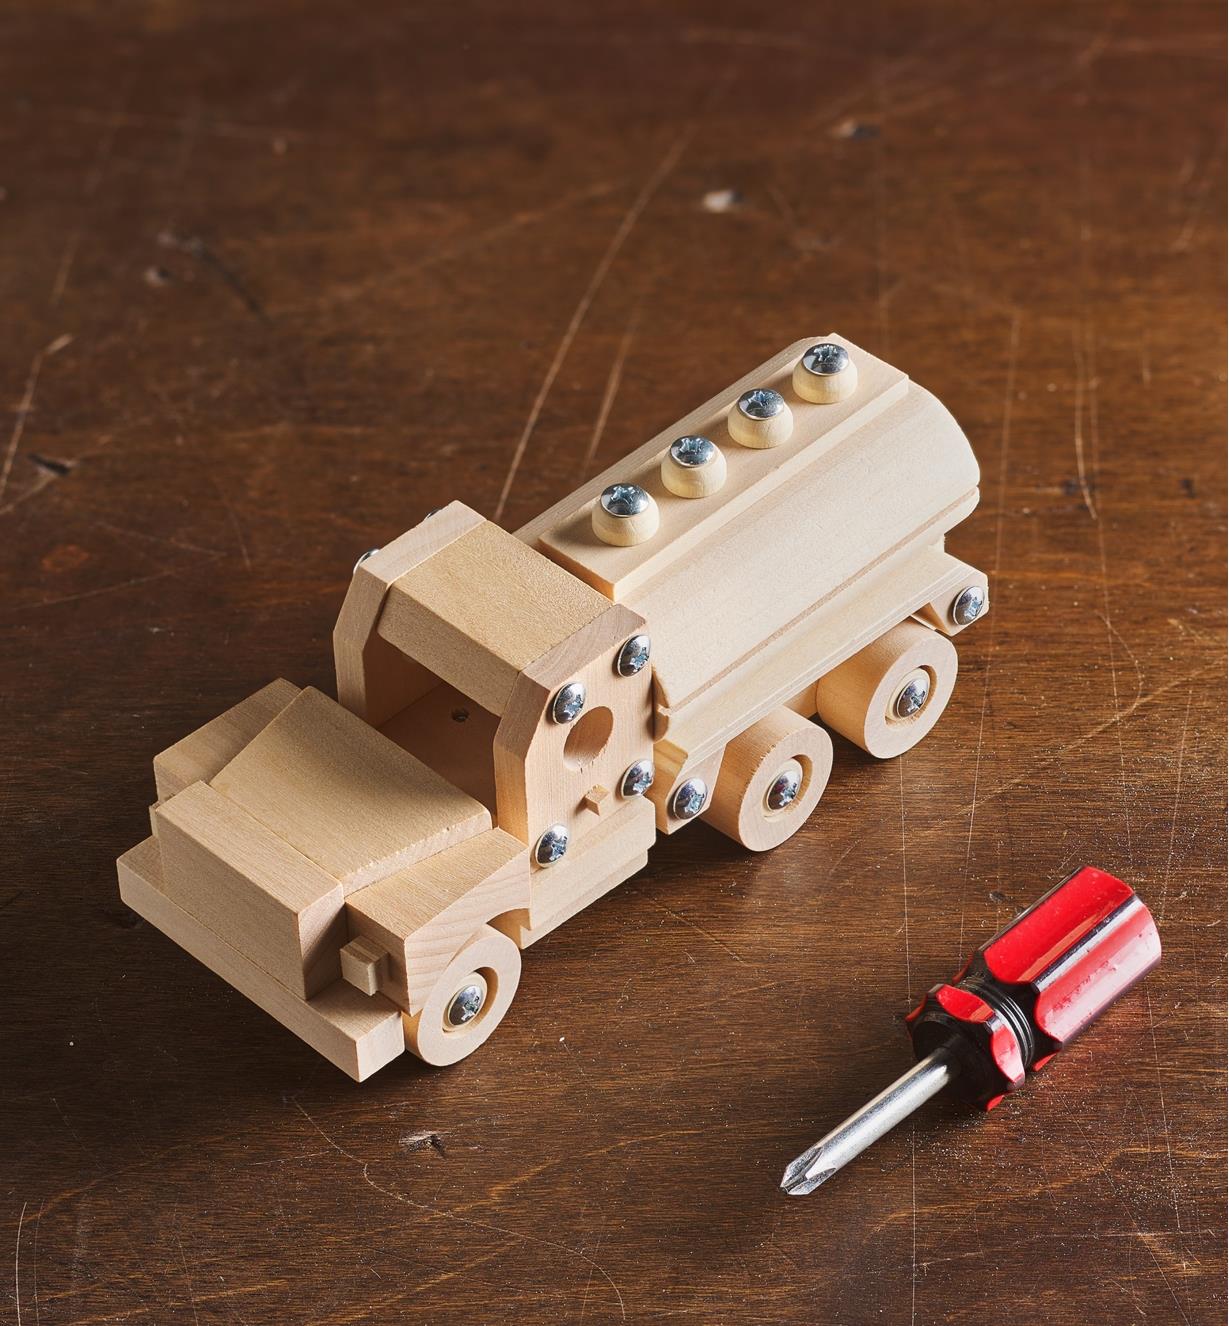 09A0535 - Tanker Truck Easy-To-Build Wooden Toy Kit